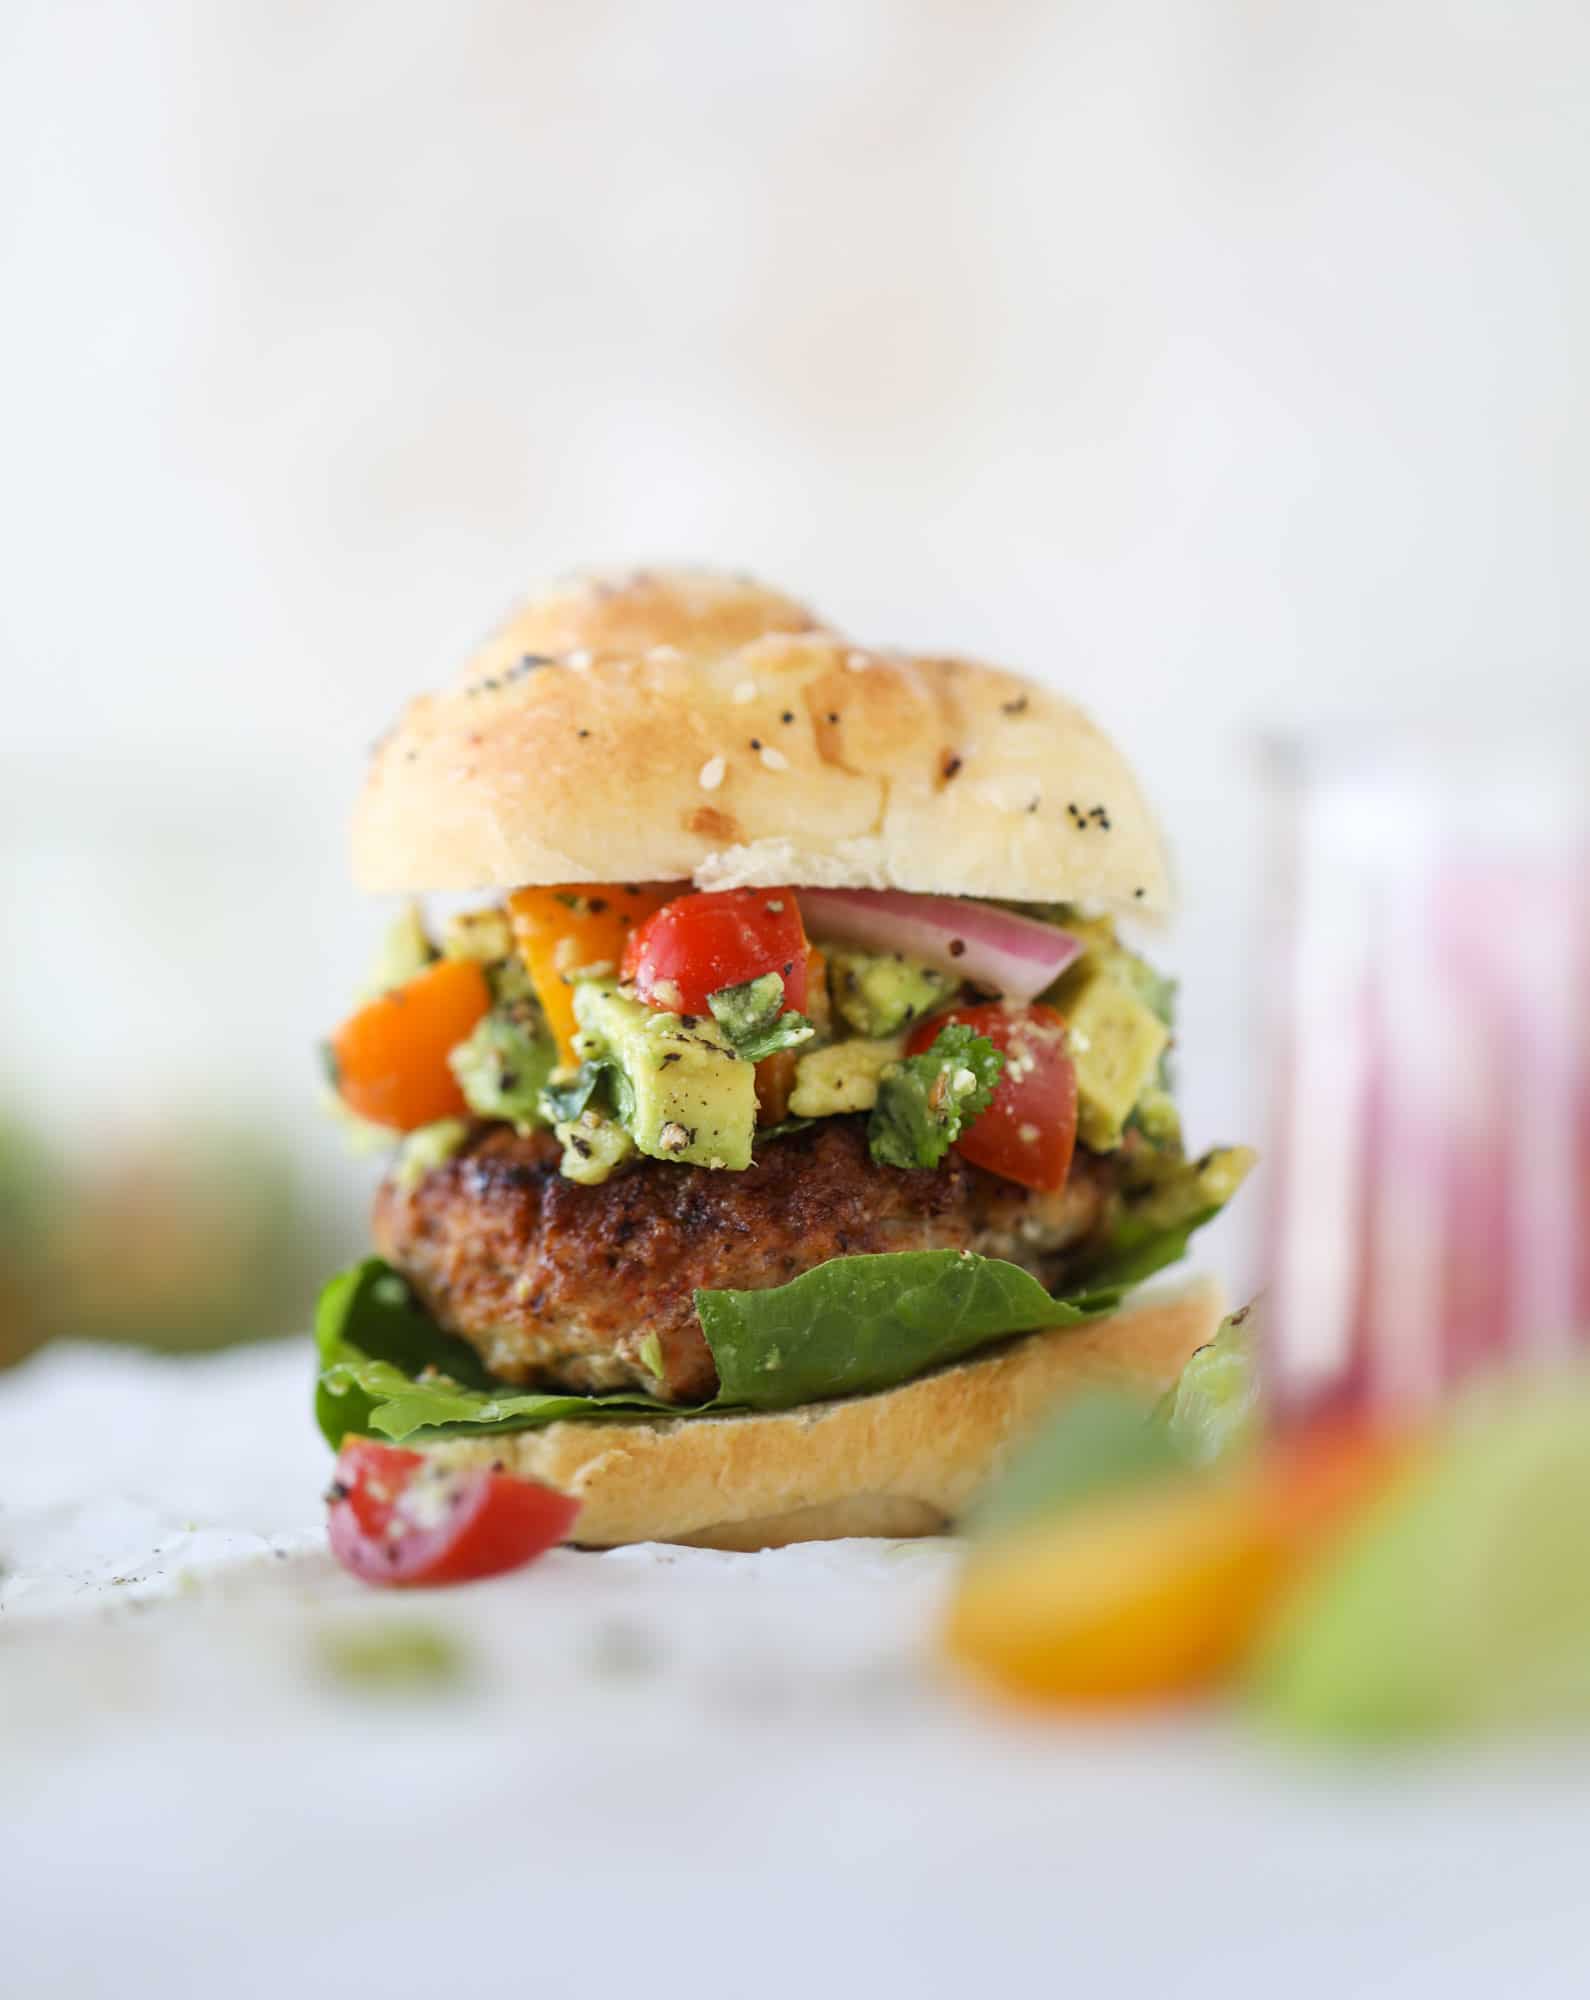 These turkey burgers are full of flavor and topped with a delicious chunky guacamole to take the flavor over the top. The perfect easy dinner! I howsweeteats.com #turkey #burgers